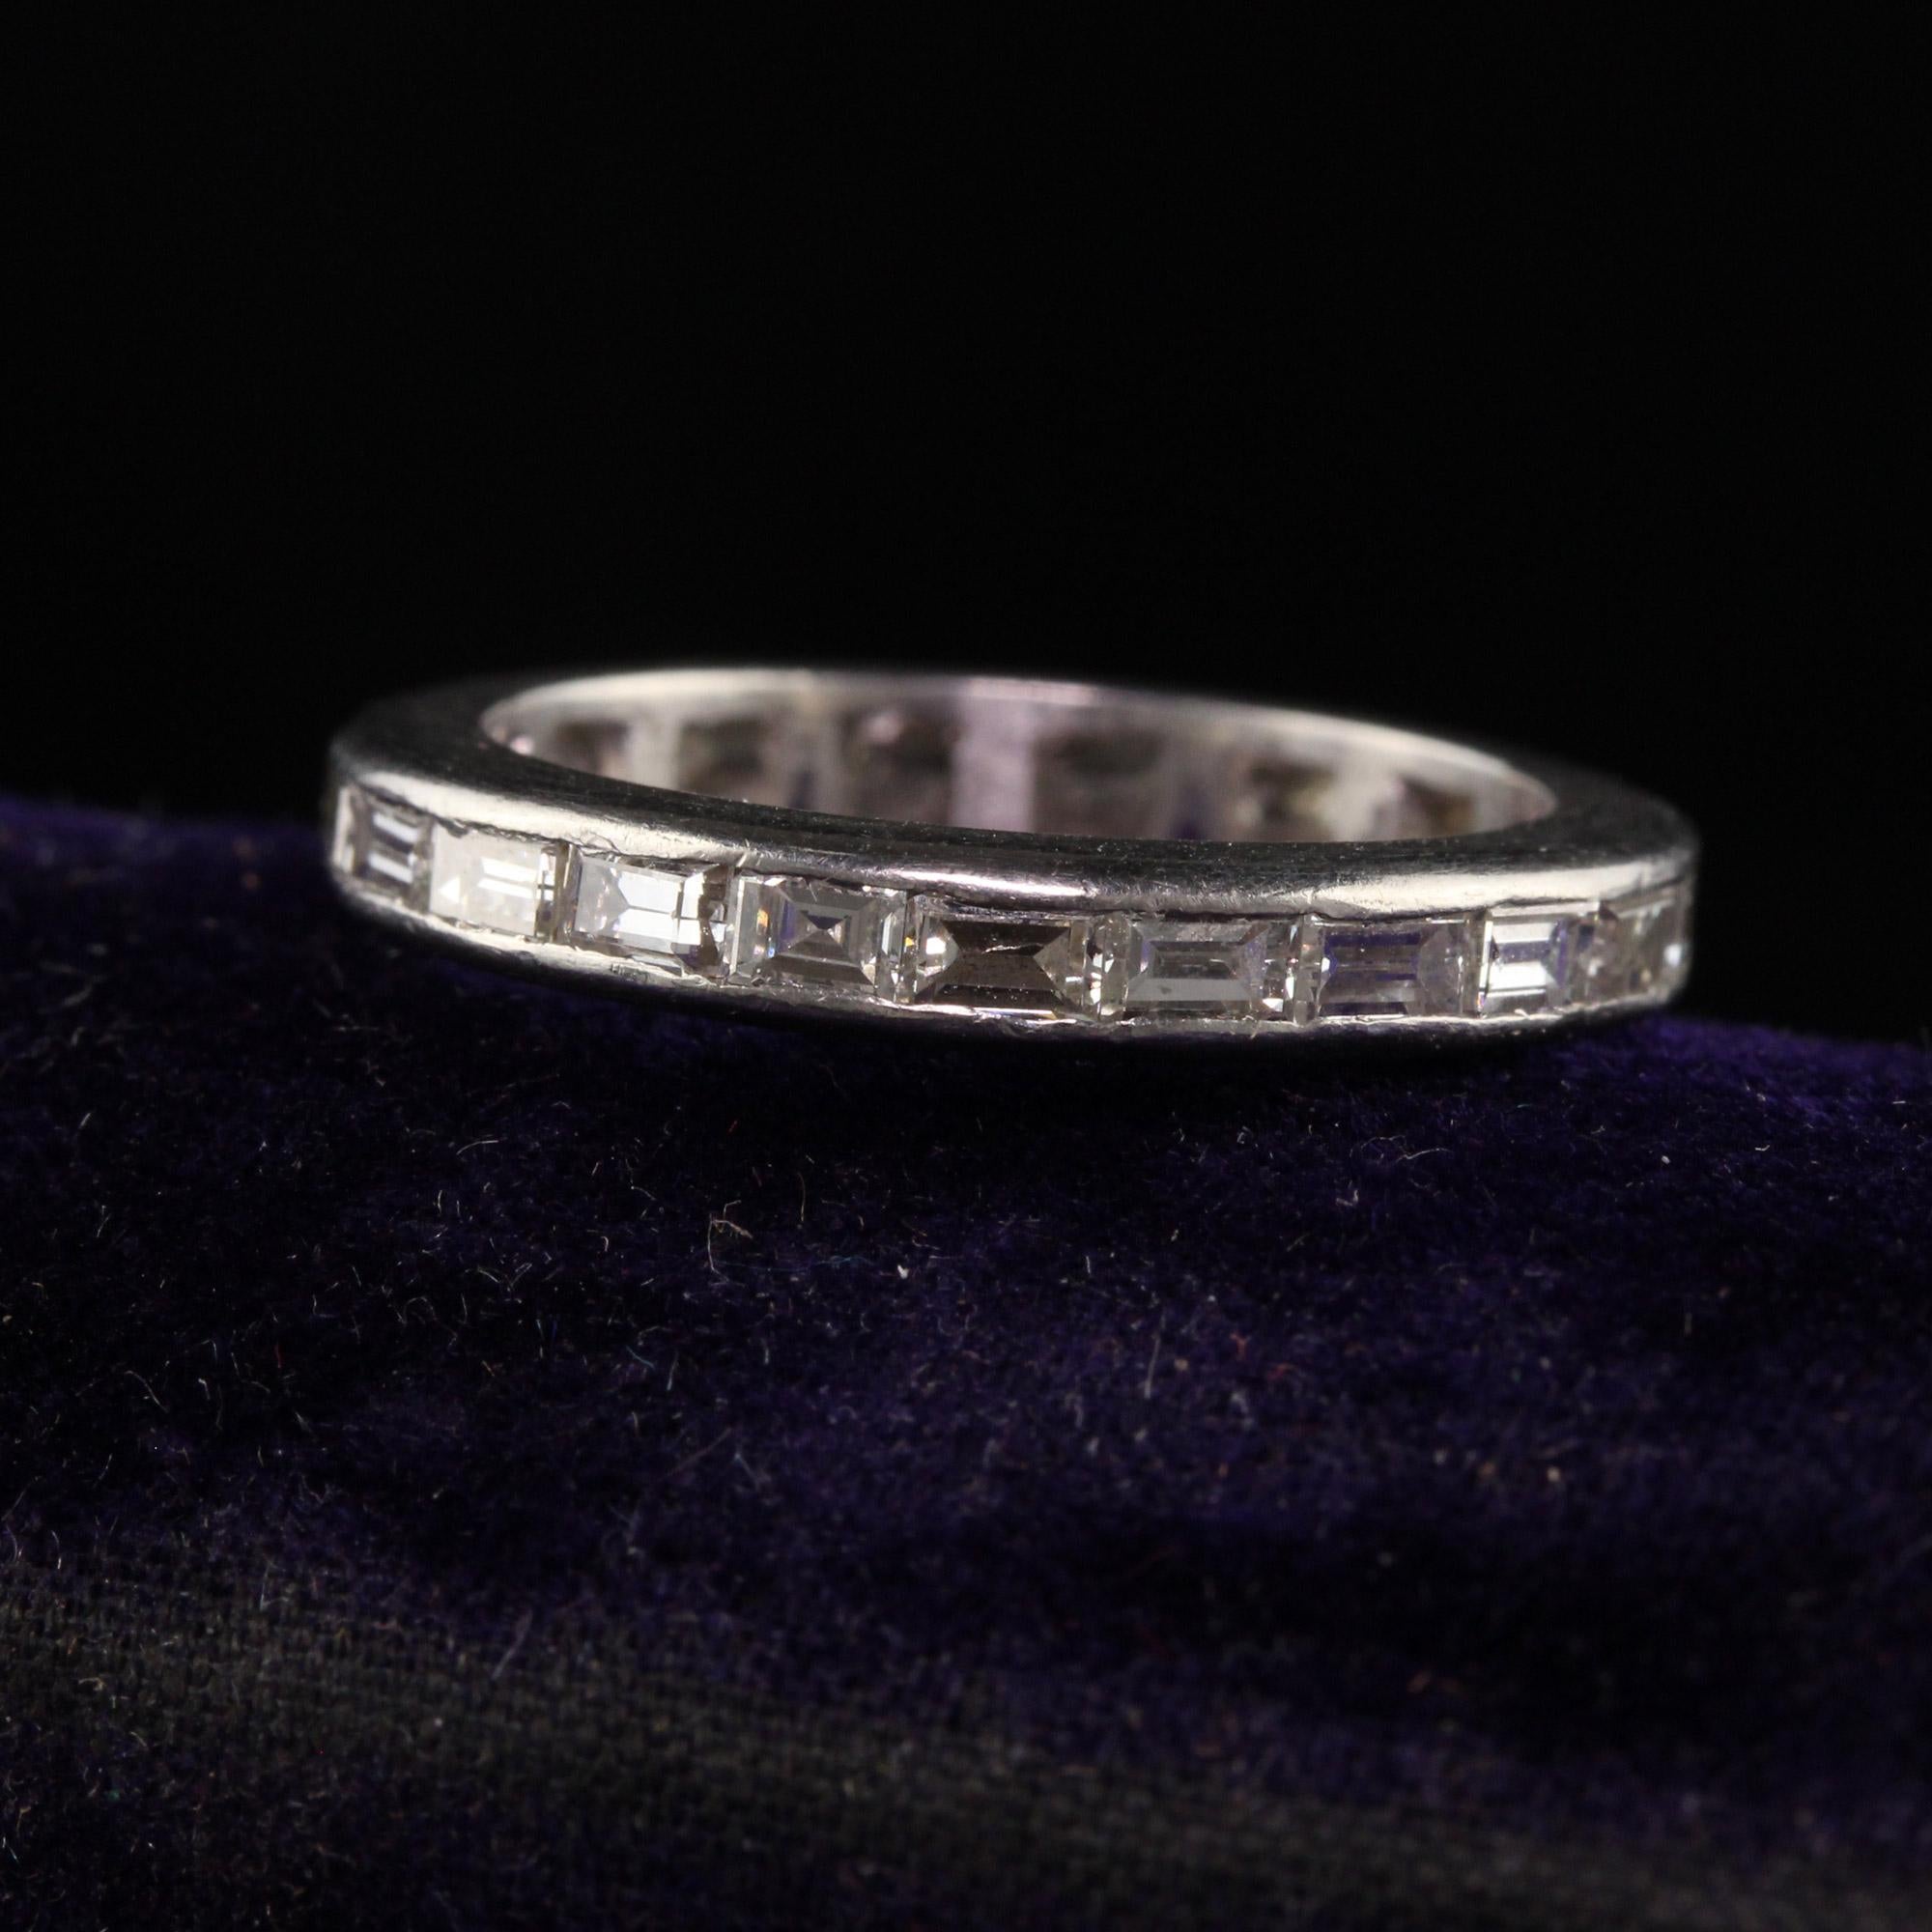 Beautiful Antique Art Deco Platinum Baguette Diamond Eternity Band - Size 6. This beautiful ring is crafted in platinum. The ring has baguette diamonds going around the entire band and has an impressive look.

Item #R1354

Metal: Platinum

Weight: